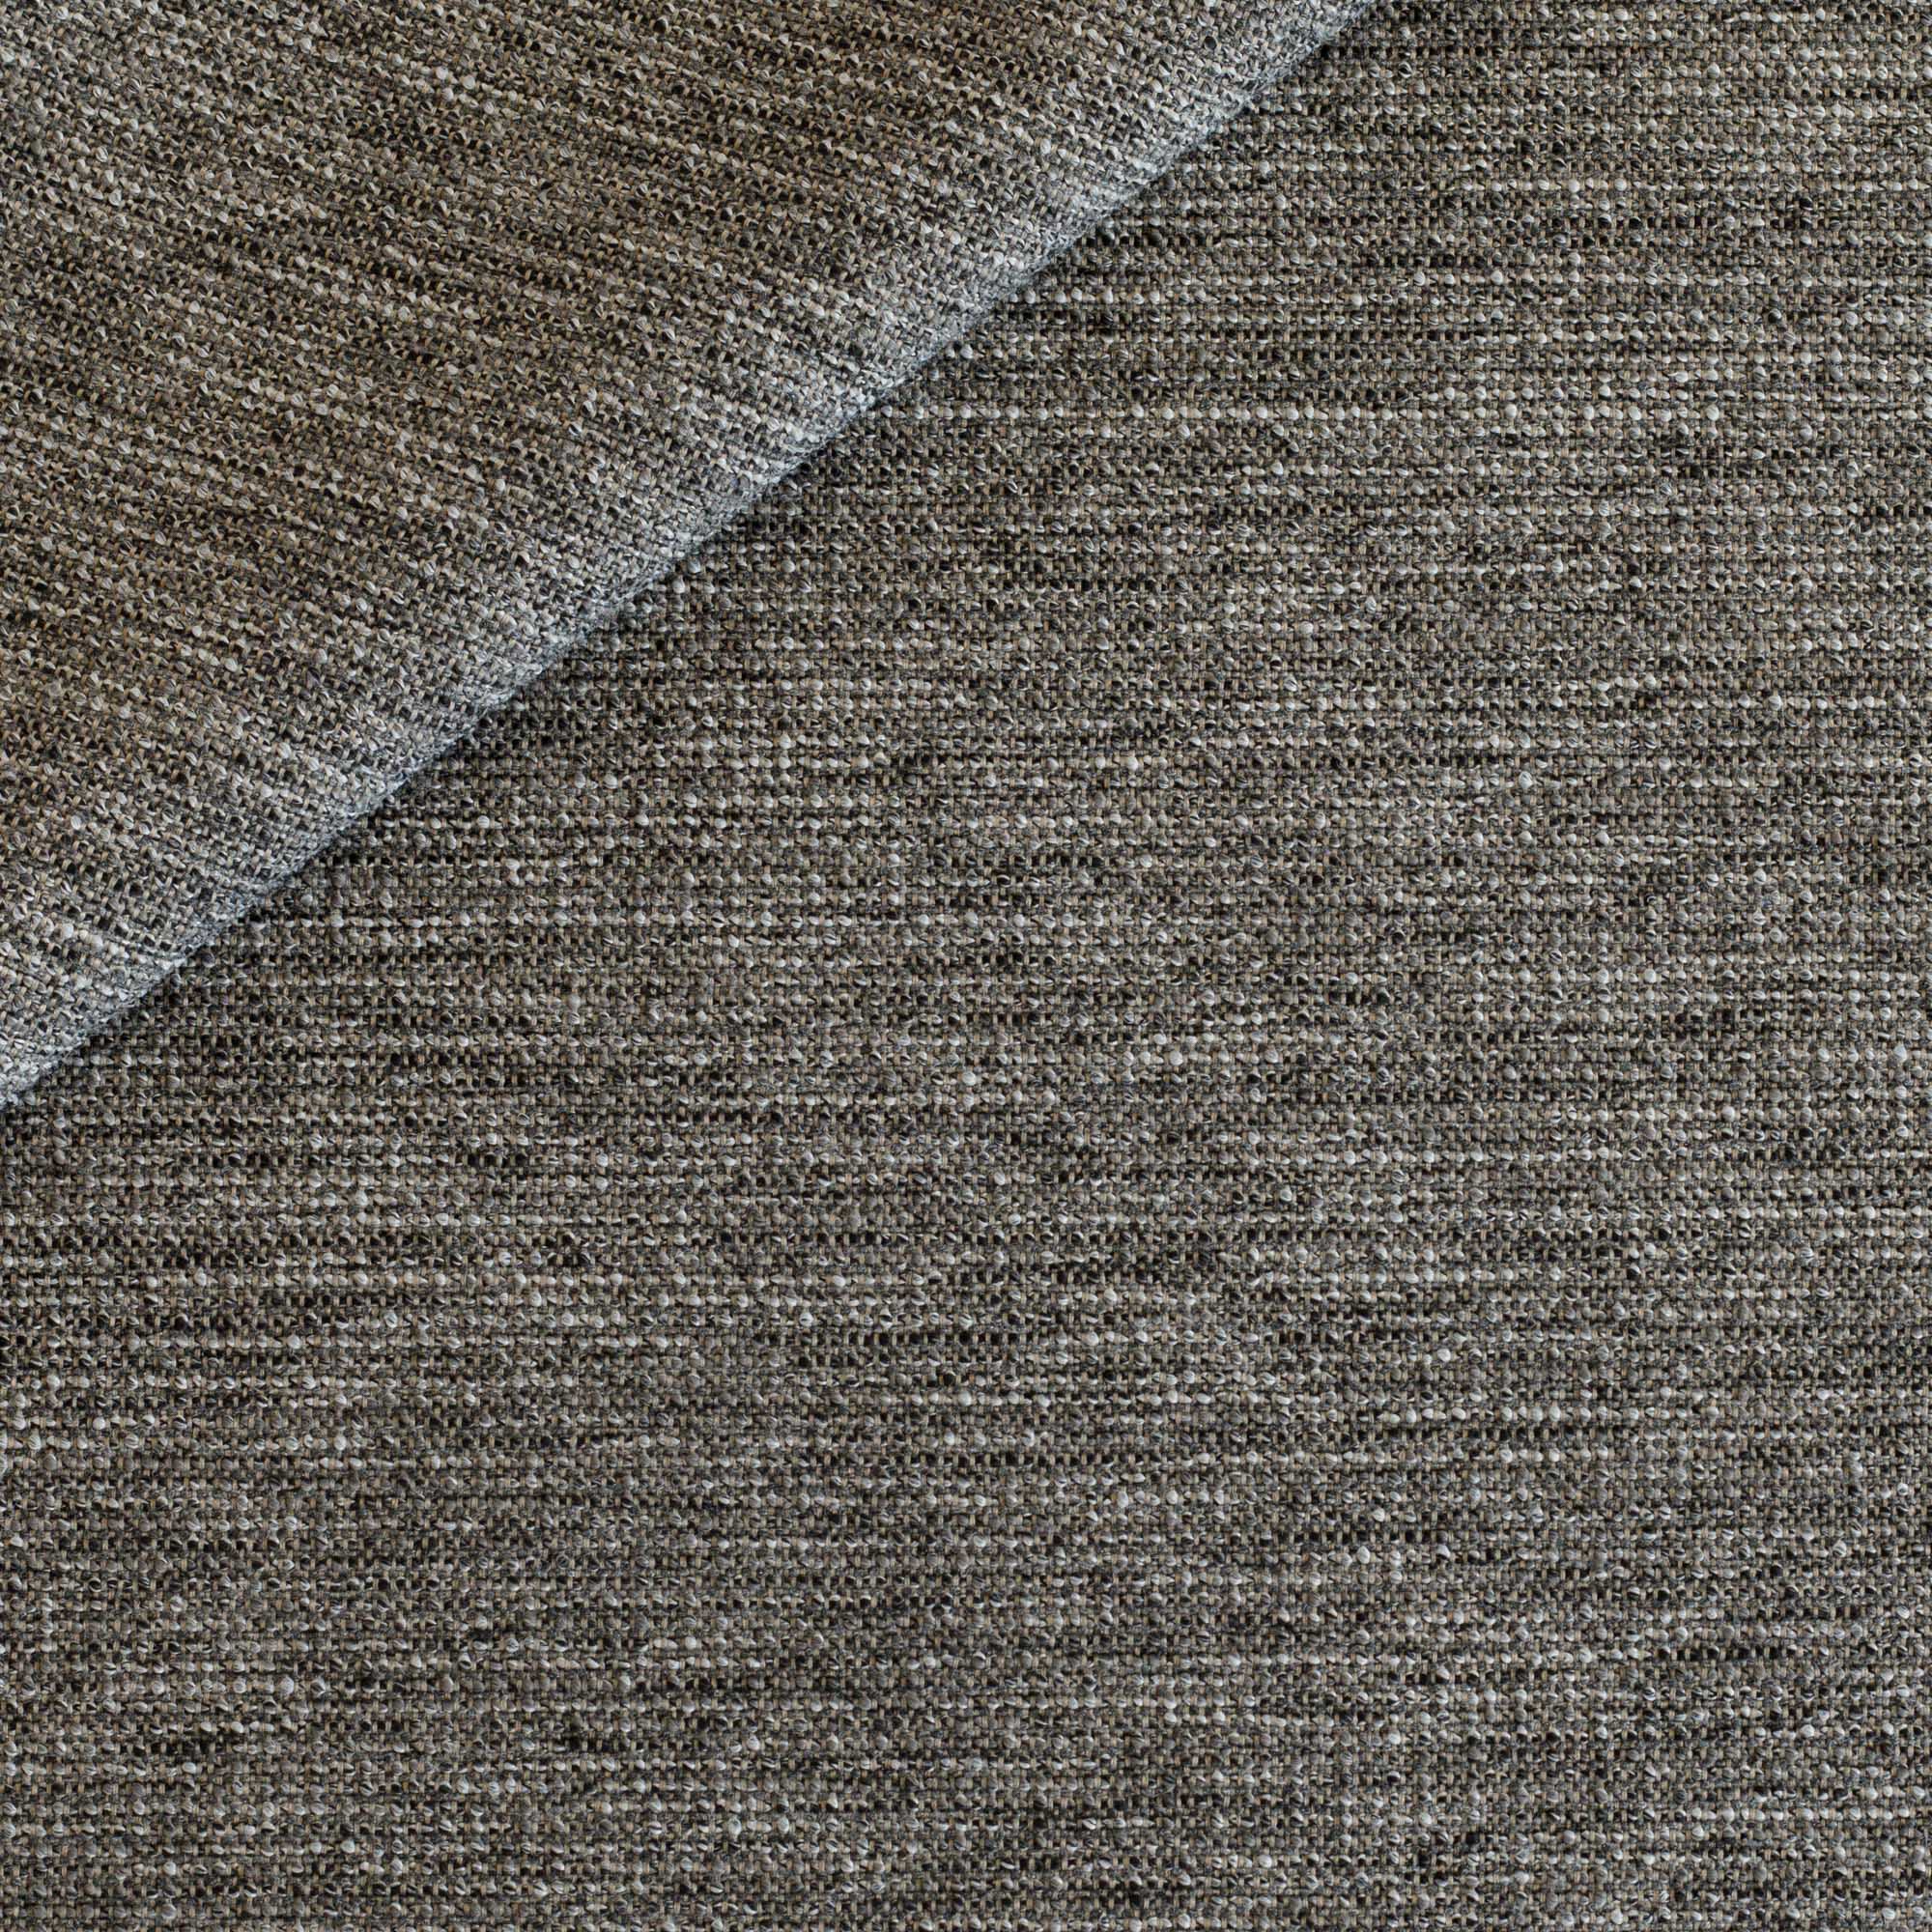 a charcoal gray and dark brown high performance upholstery fabric